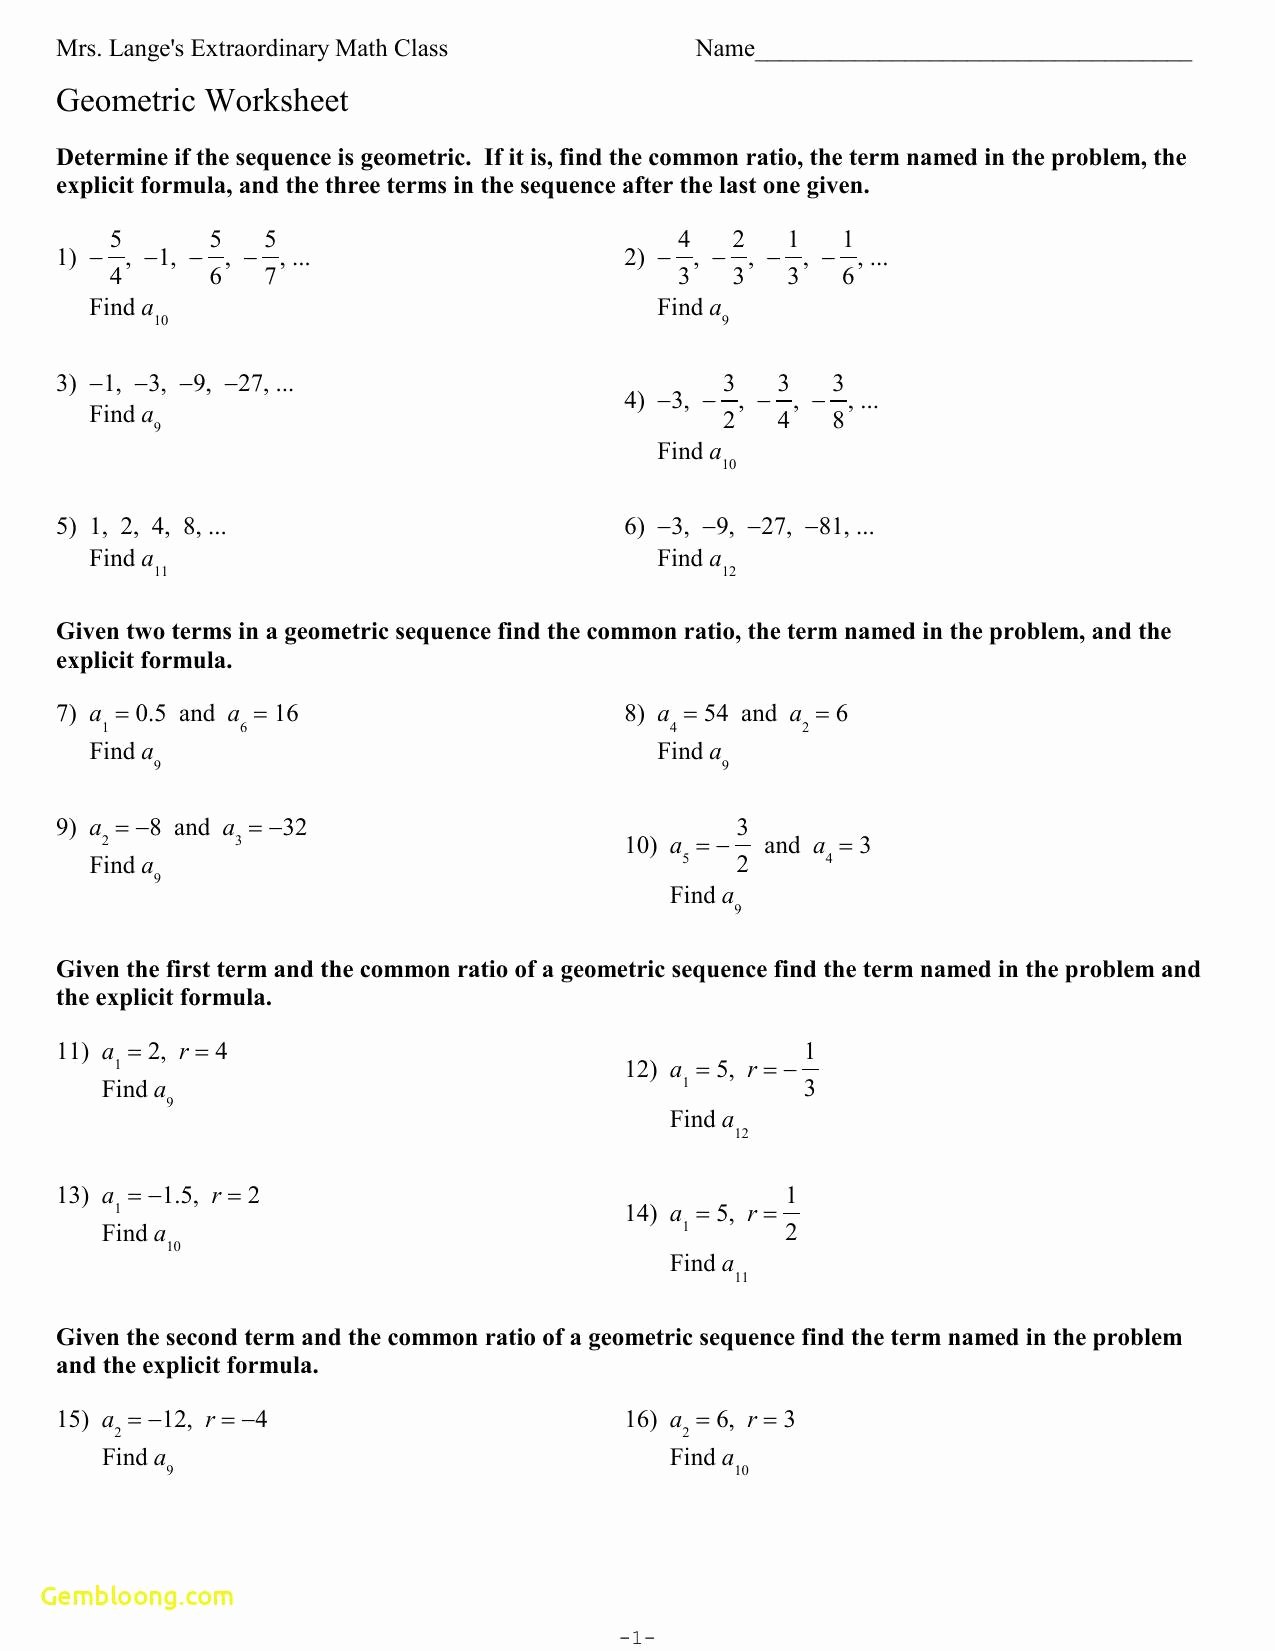 Geometric Sequences Worksheet Answers Best Of Geometric Sequences and Series Worksheet Answers